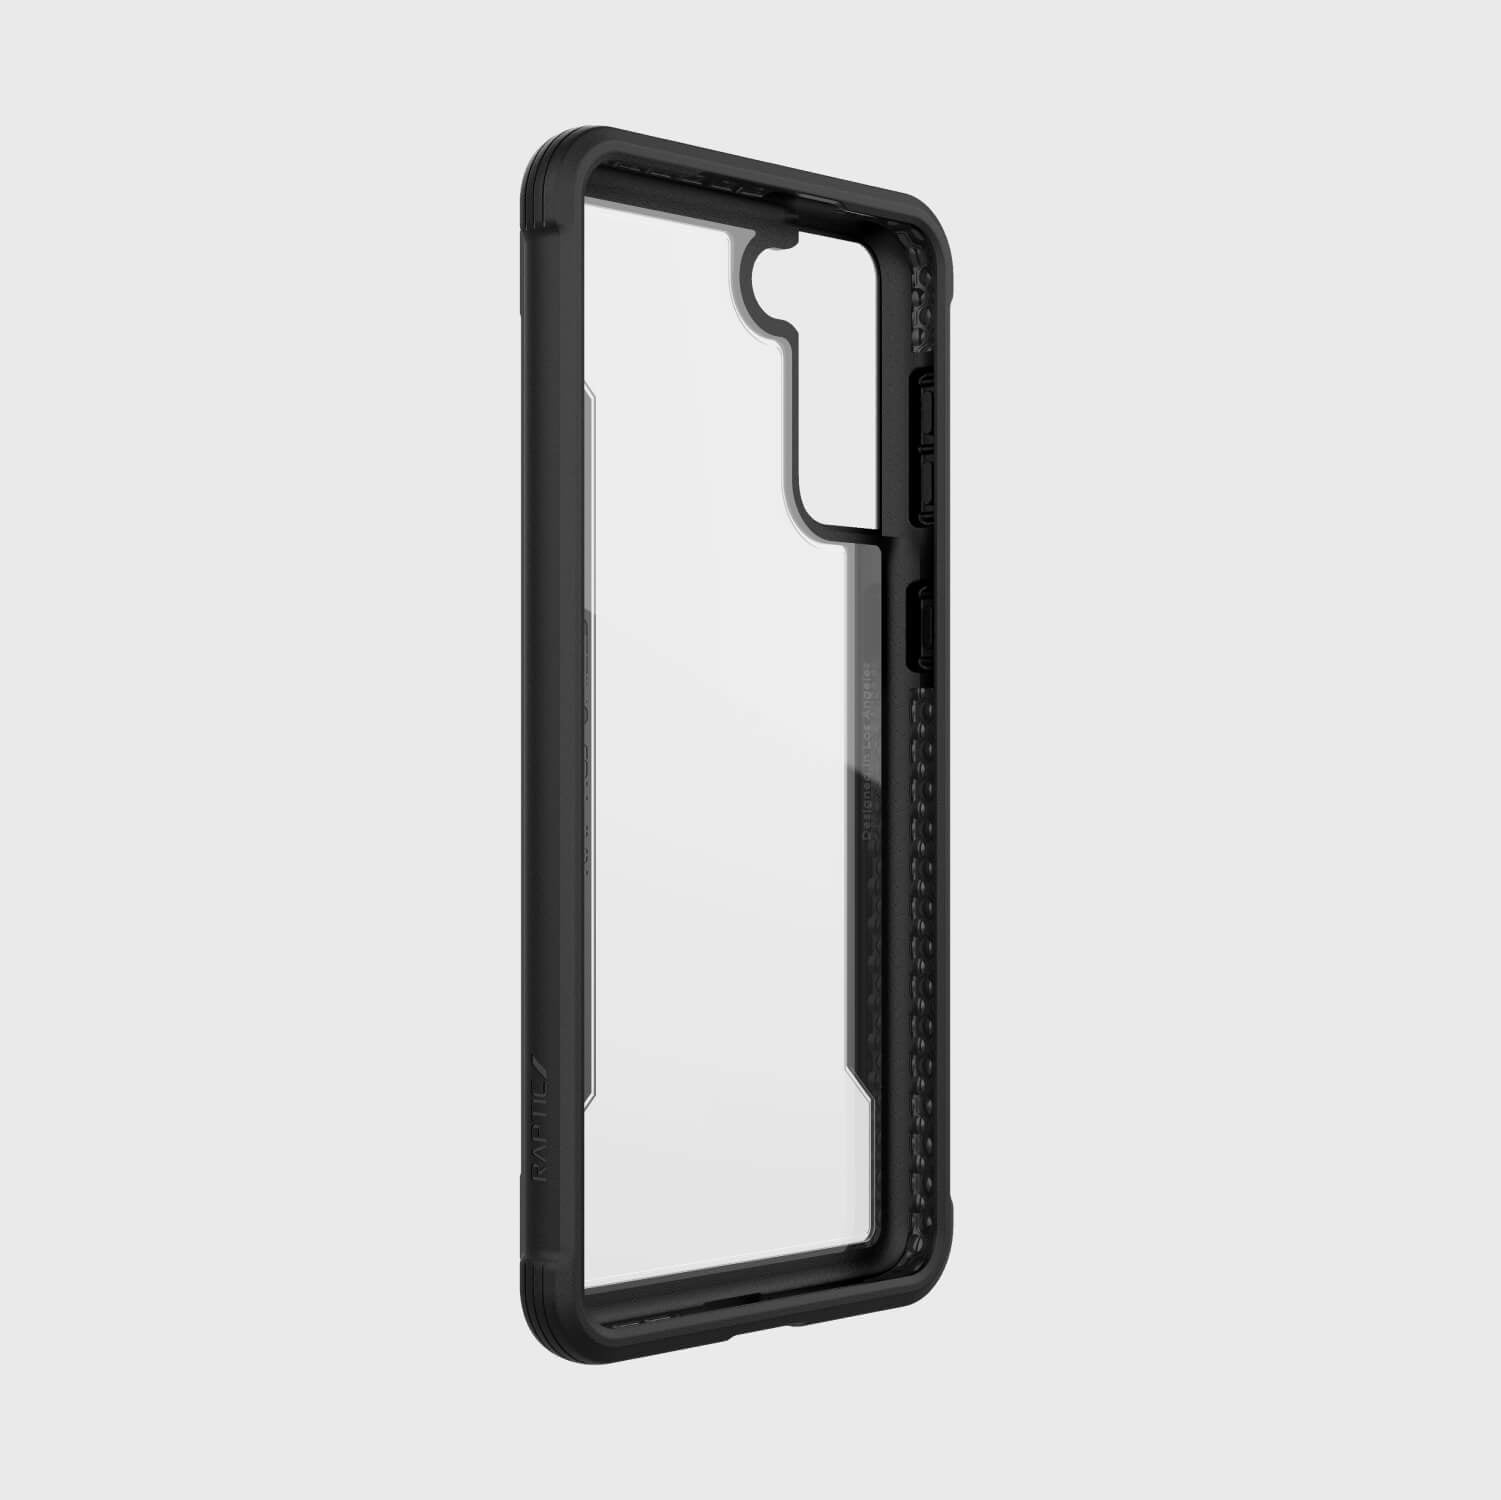 The wireless charging compatible back view of the X-Doria Samsung Galaxy S21 Case Raptic Shield Black with a lifetime warranty.